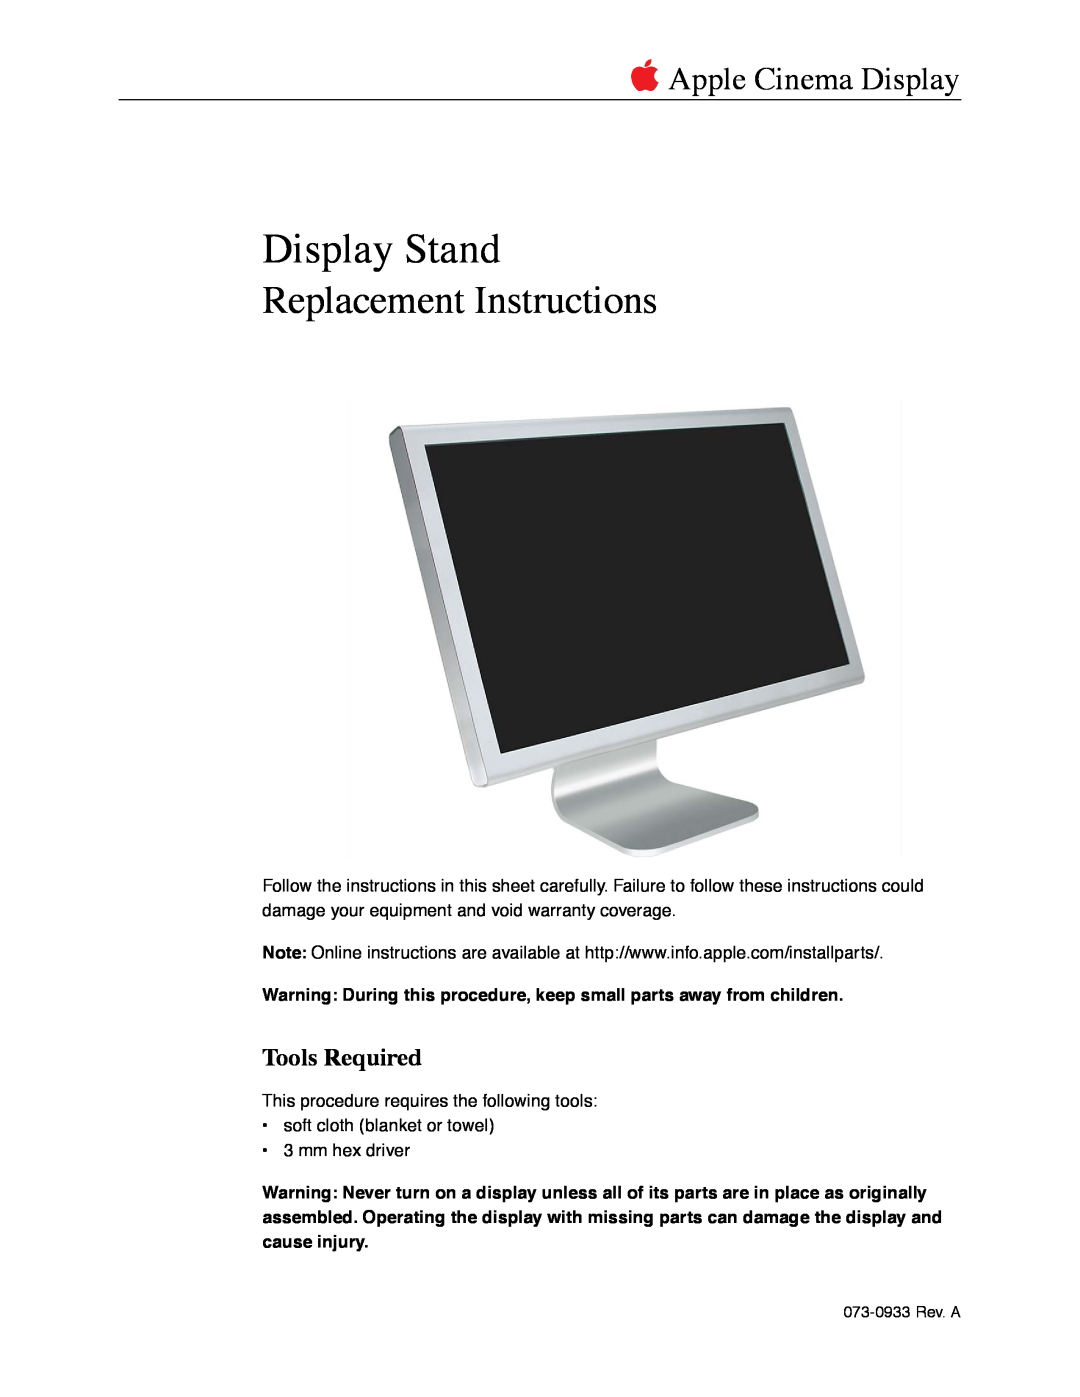 Apple Display Stand warranty Tools Required, Replacement Instructions,  Apple Cinema Display 